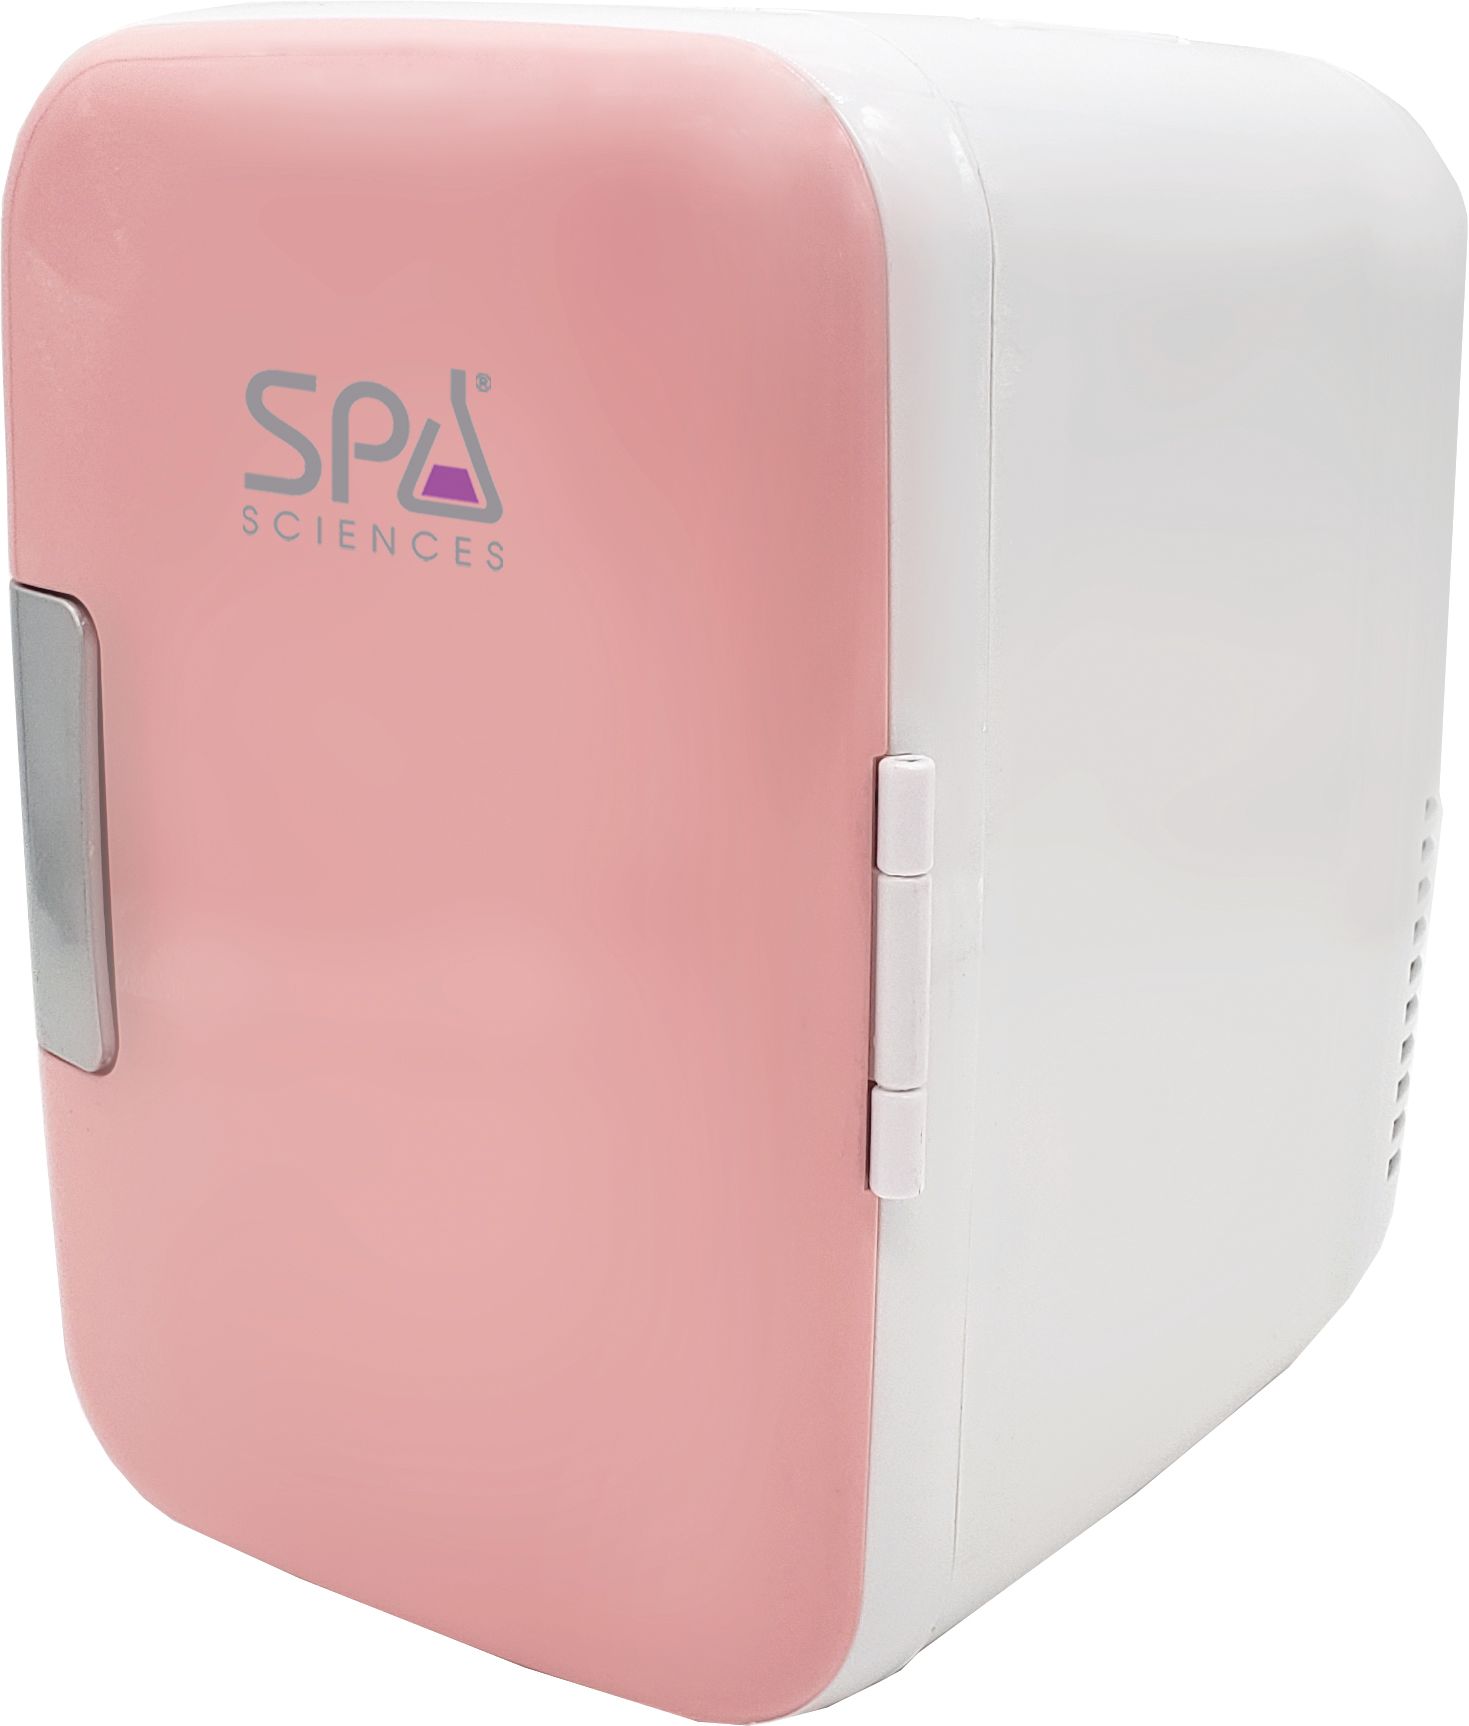 Spa Sciences COOL, Skincare Beauty Fridge with Warming Function, Pink - image 1 of 5